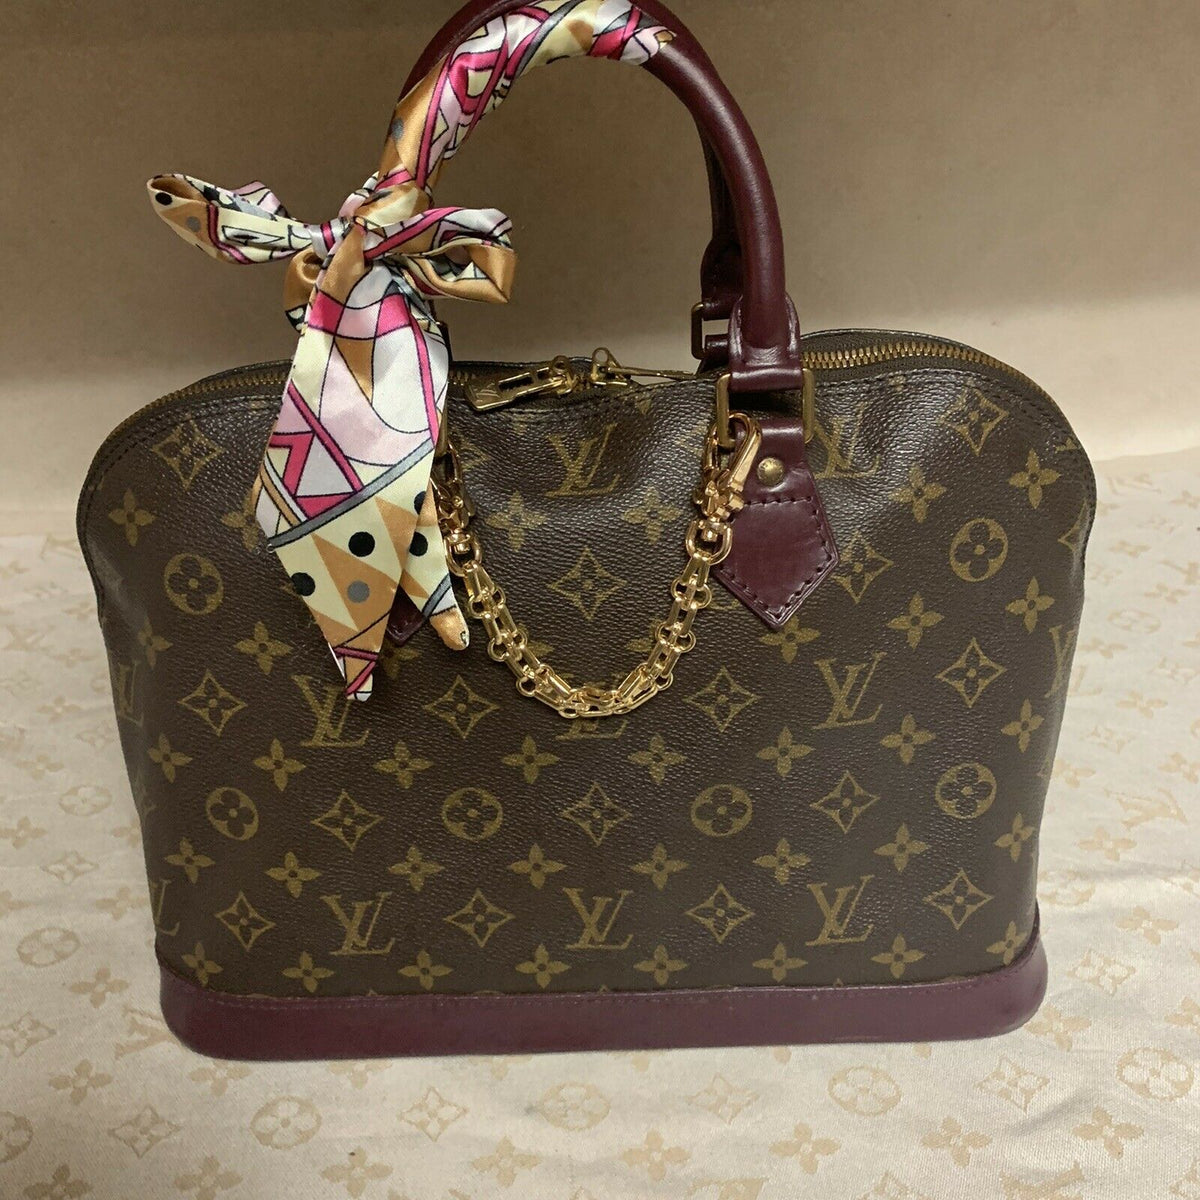 At under $200 this neoprene Mia Bag is a style steal, Louis Vuitton Alma  Handbag 389796